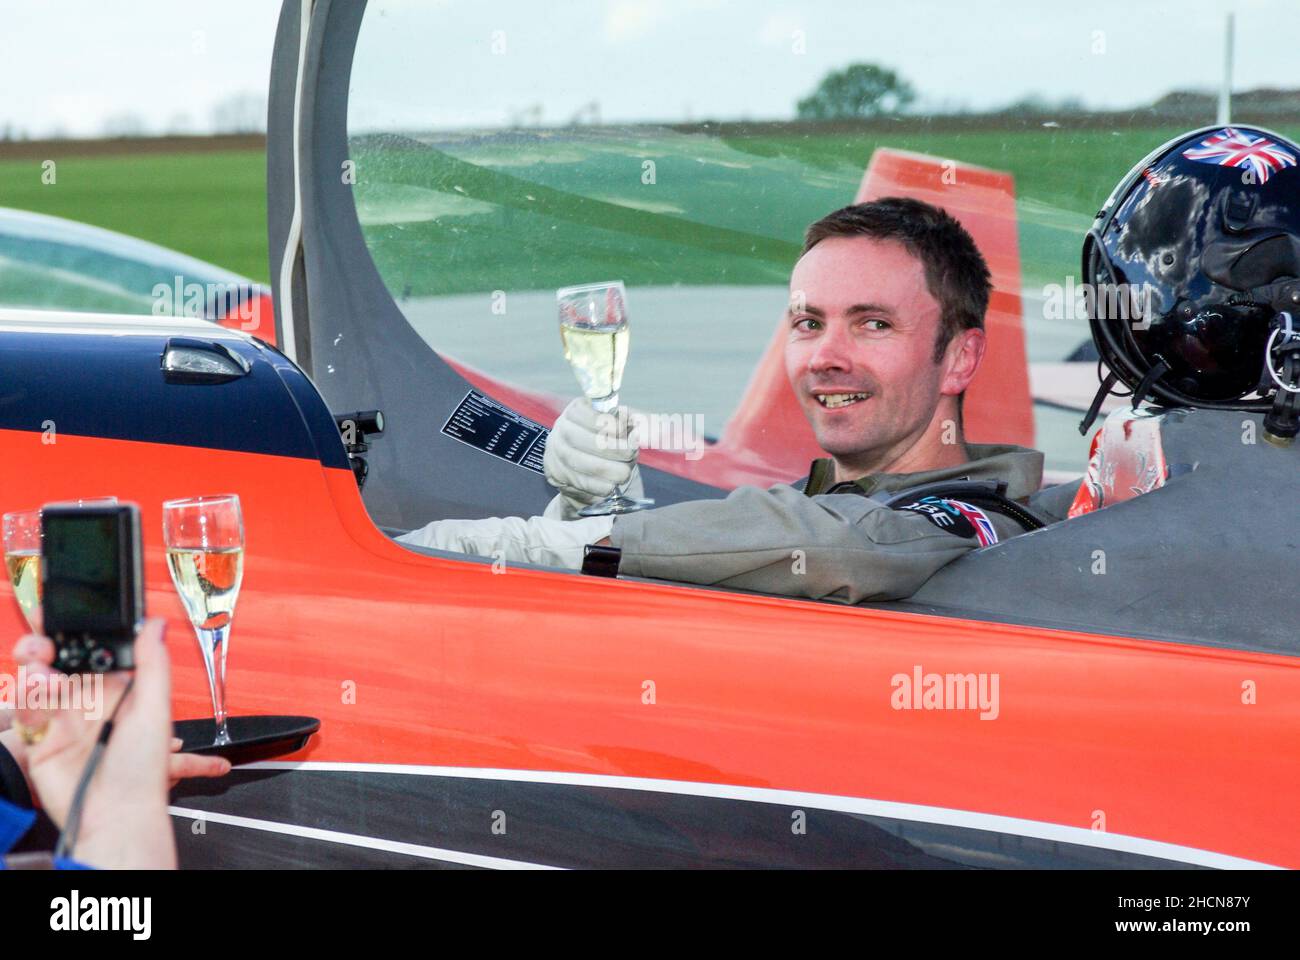 Jason Phelan completing an aerobatic challenge for the fly2help charity, having been flown by numerous aerobatic teams and pilots. Fundraiser Stock Photo